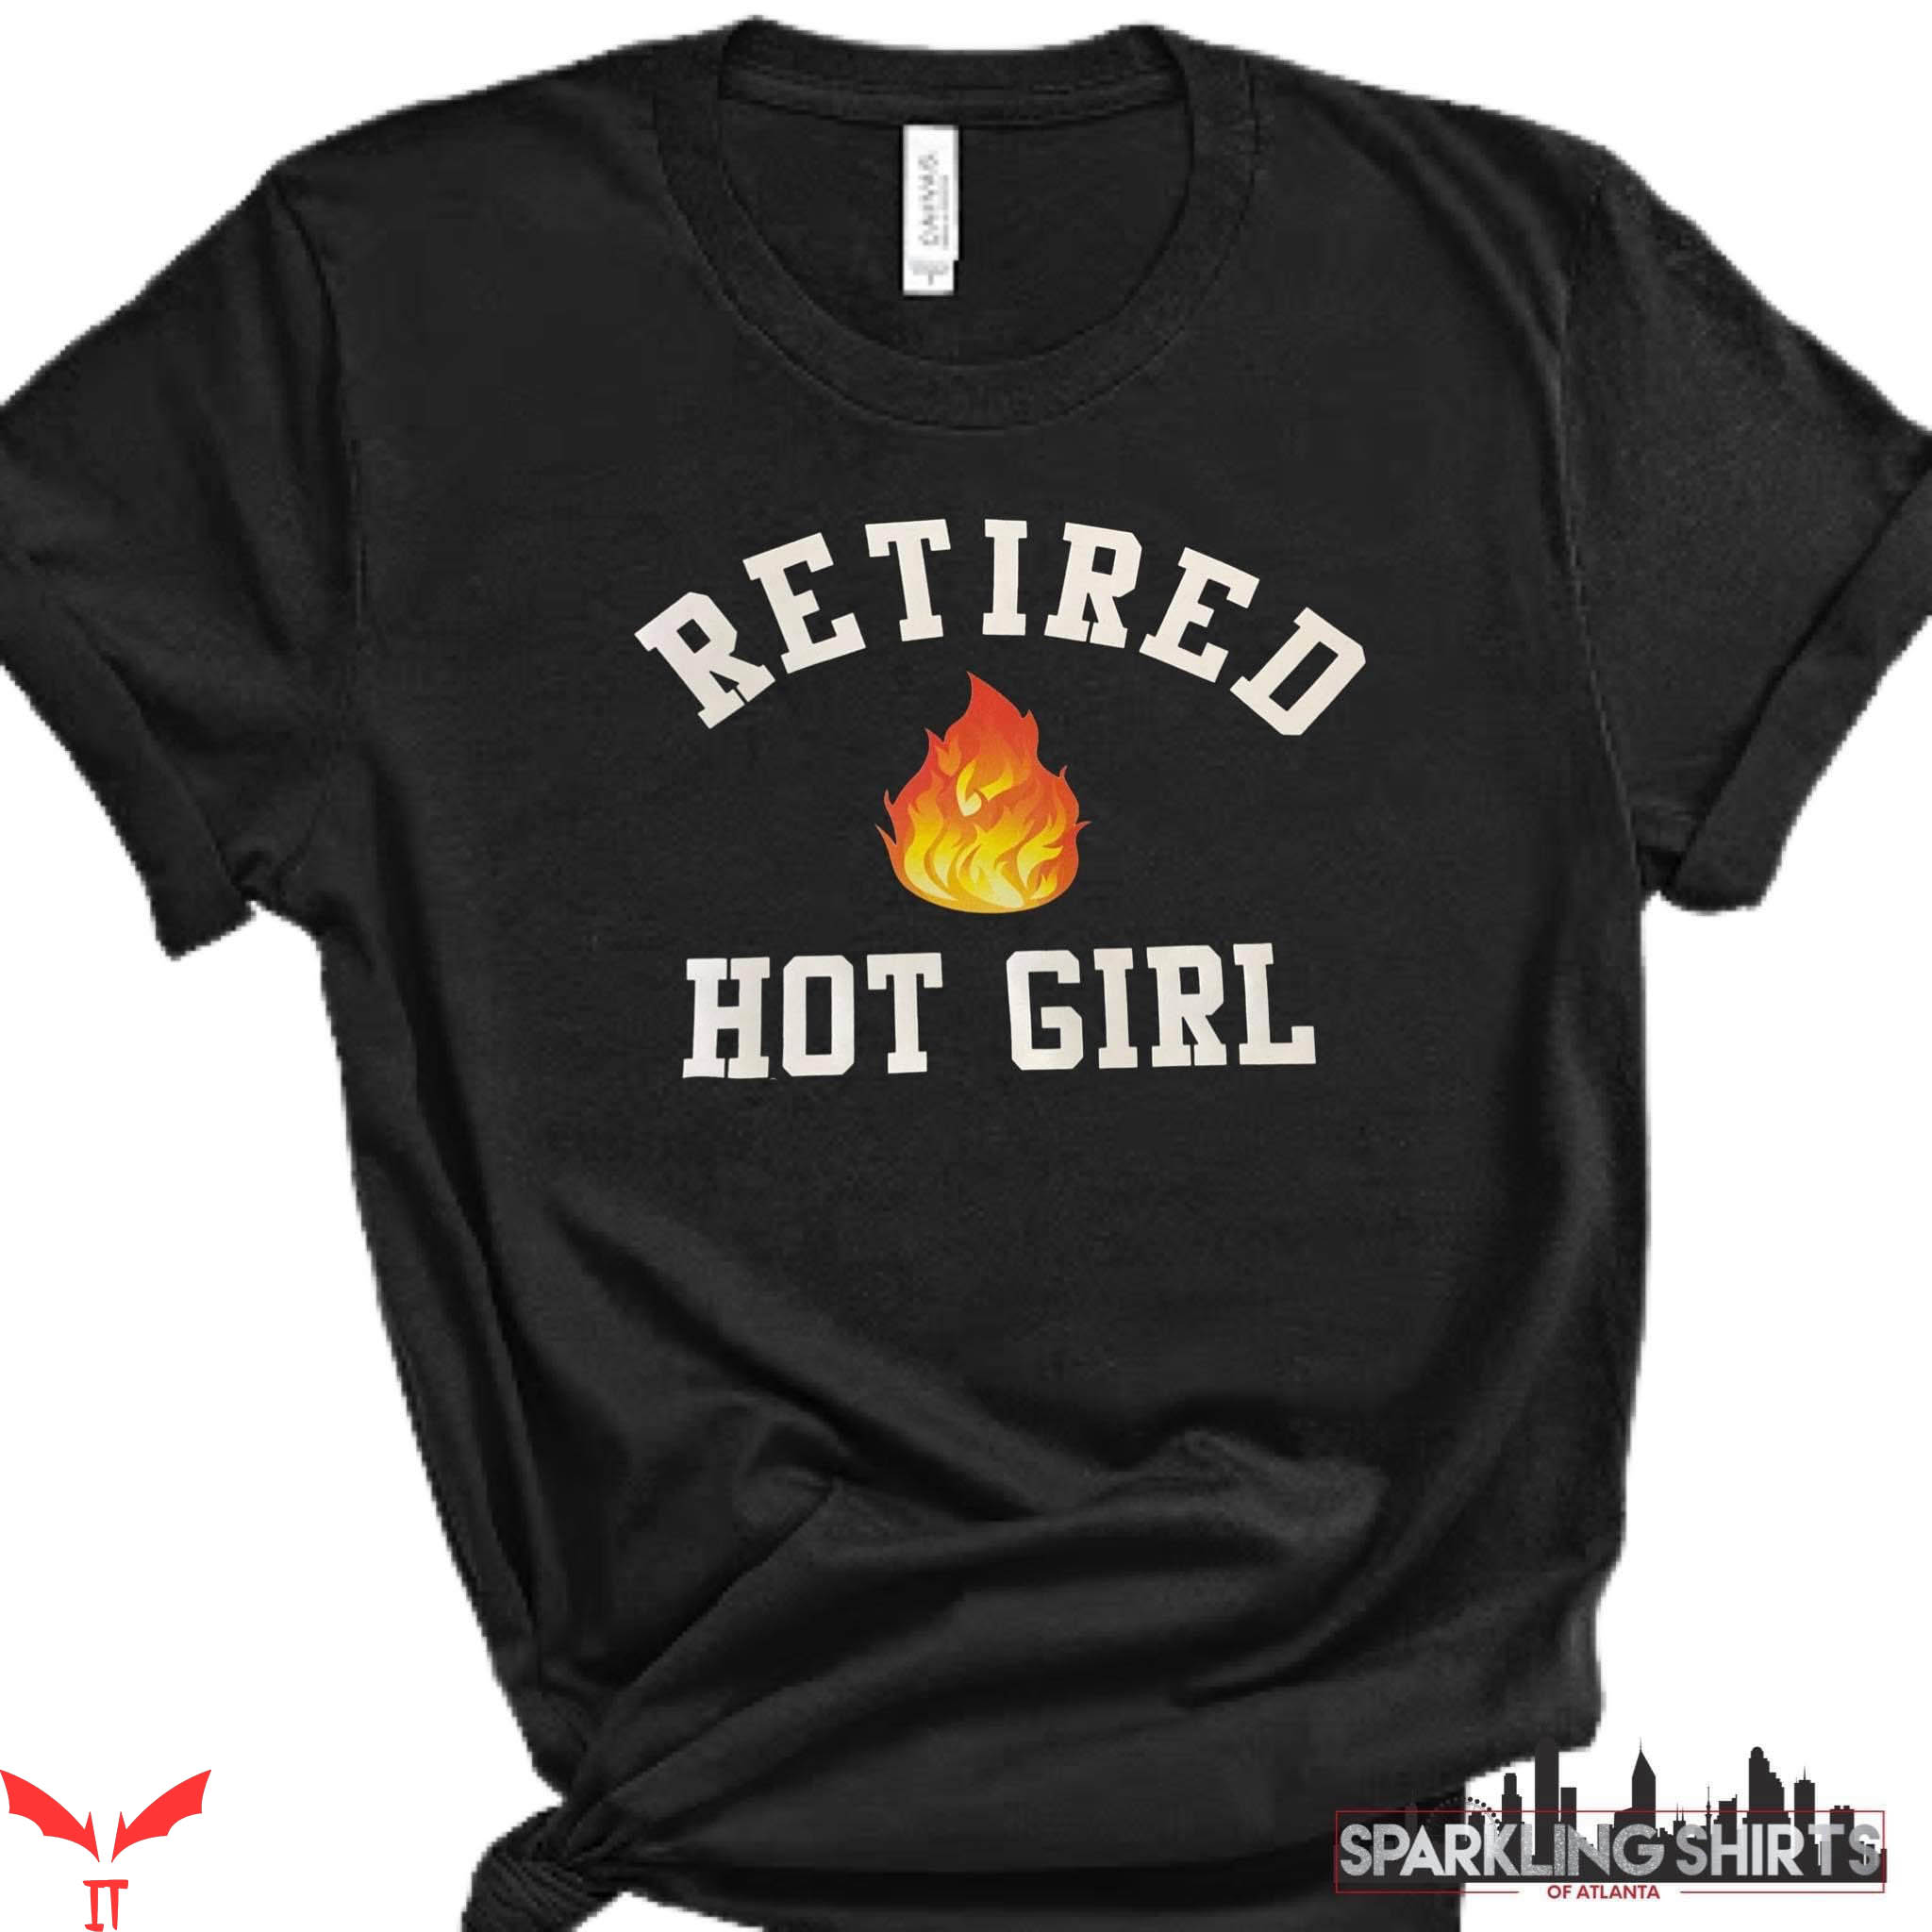 Retired Hot Girl T-Shirt Funny Sarcastic Graphic Tee Shirt